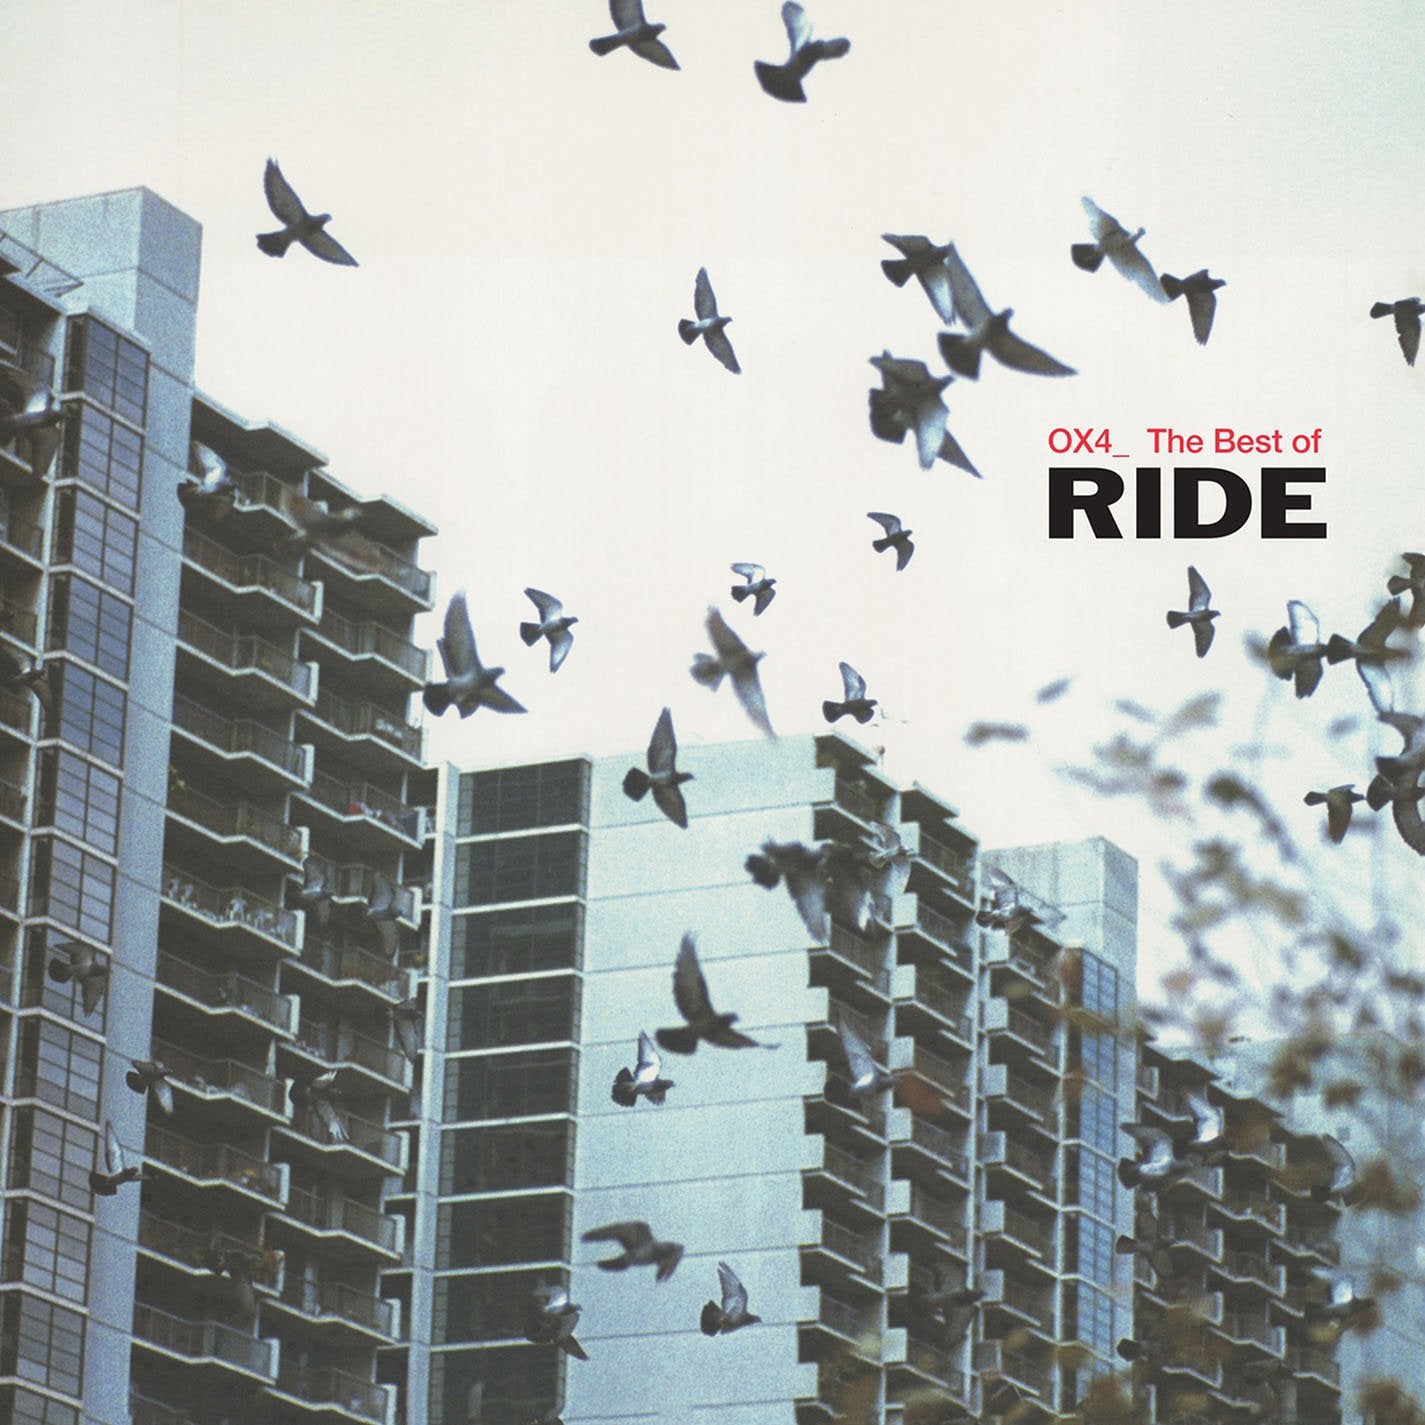 Ride - OX4_The Best of